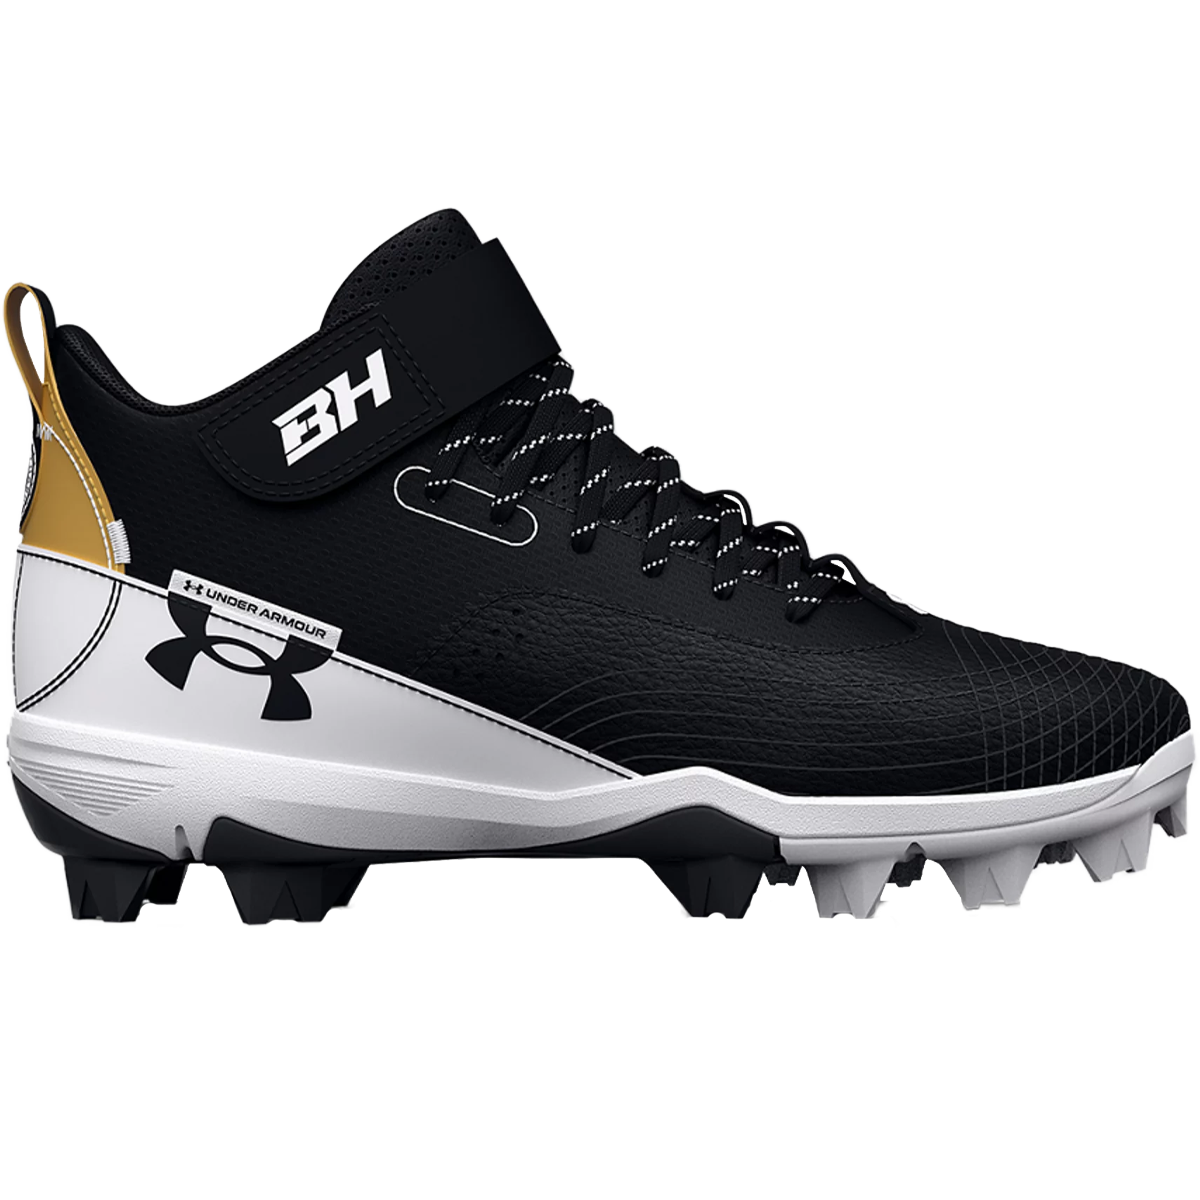 Youth Harper 7 Mid RM Baseball Cleats alternate view